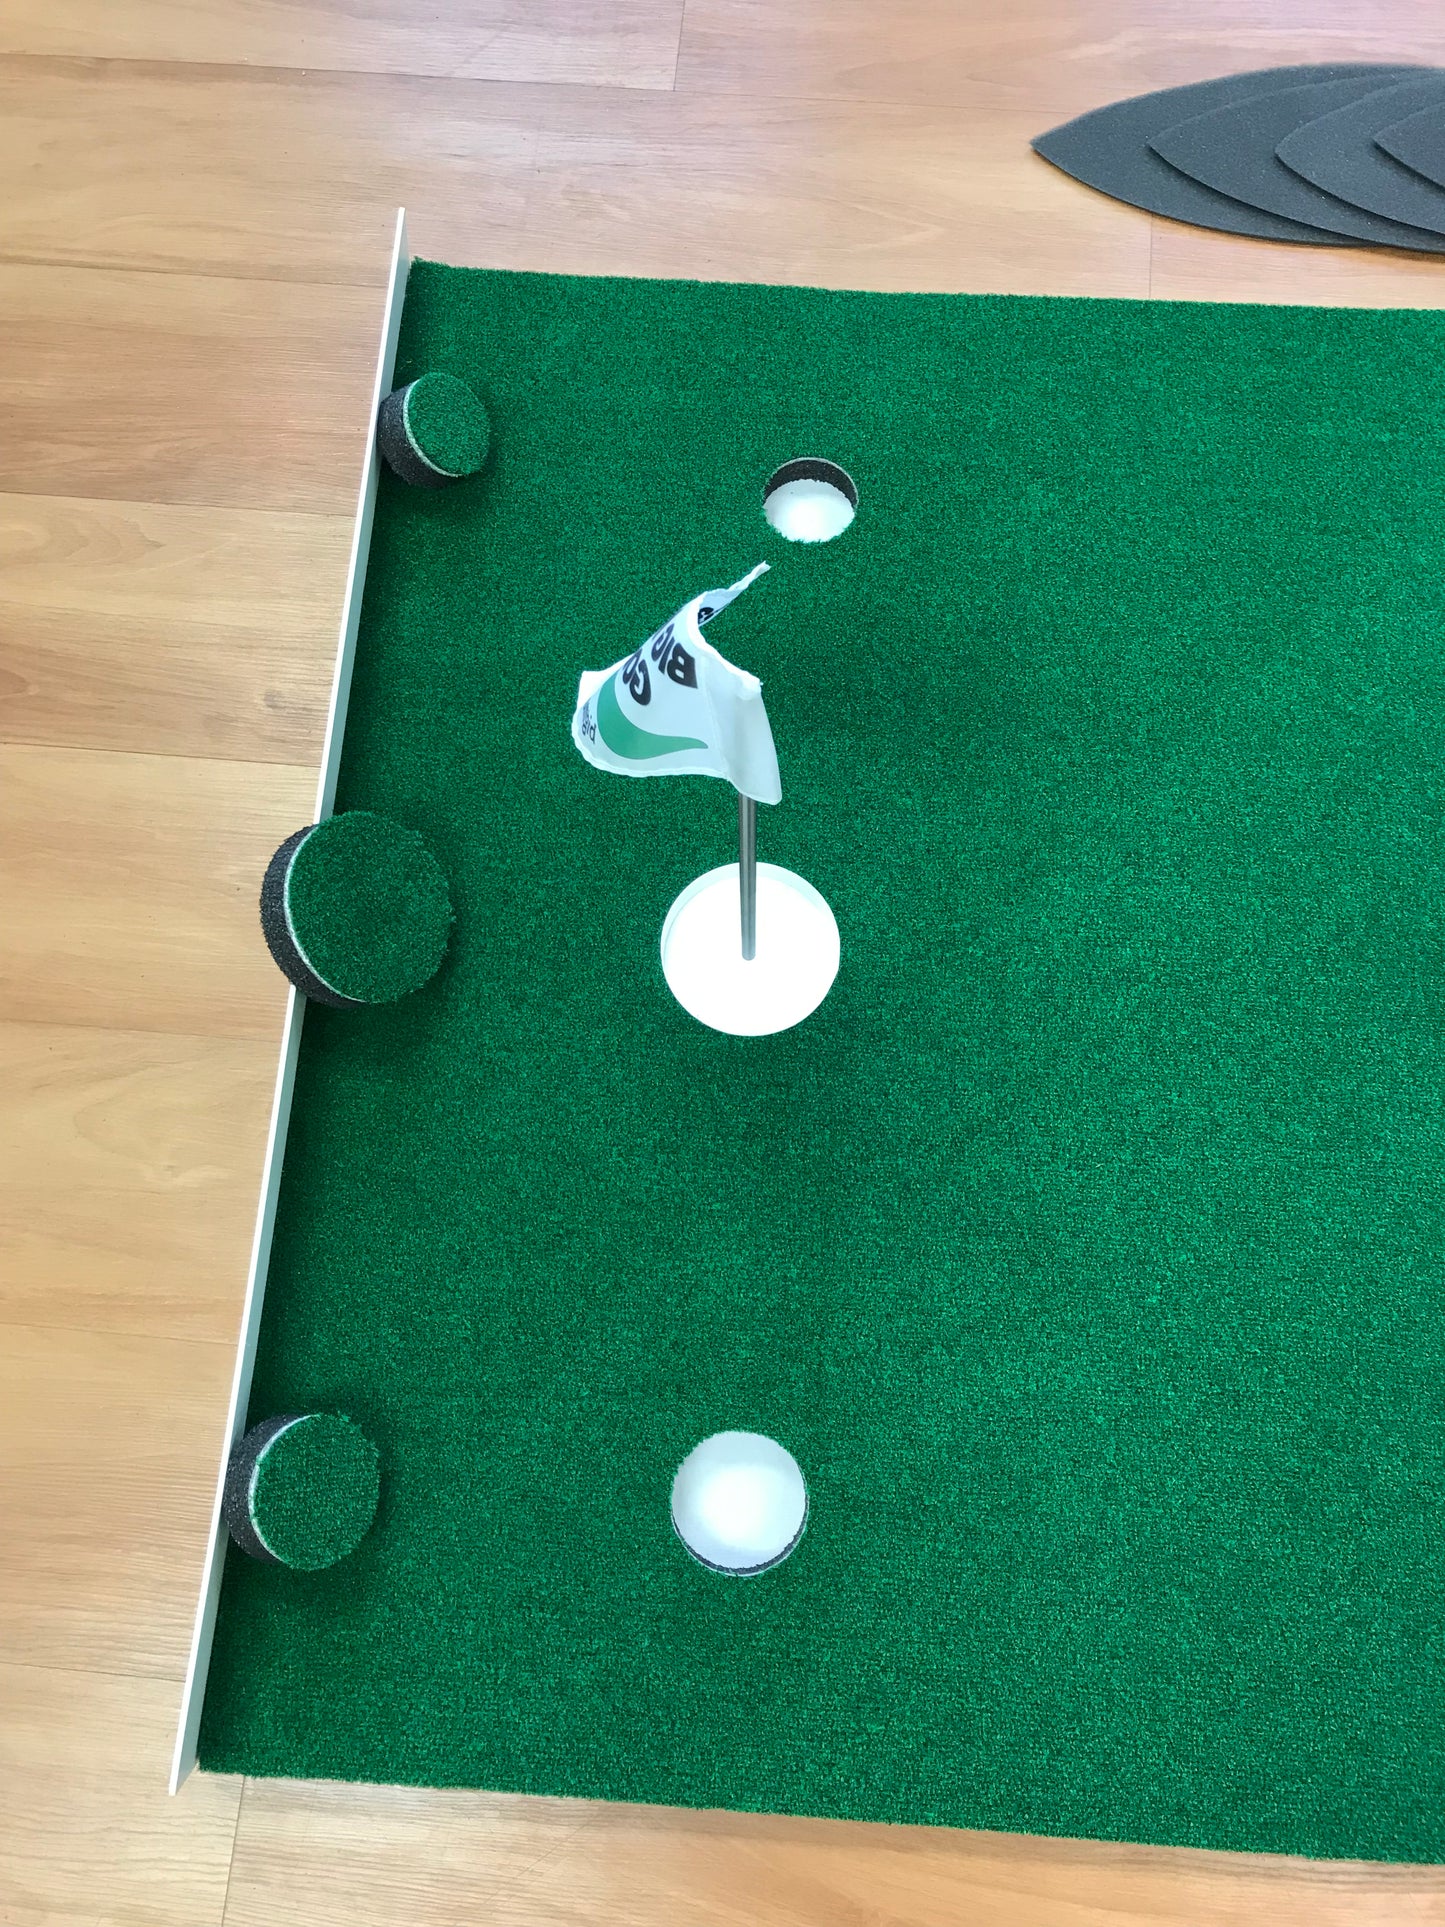 Big Moss Competitor Pro TW Putting Green